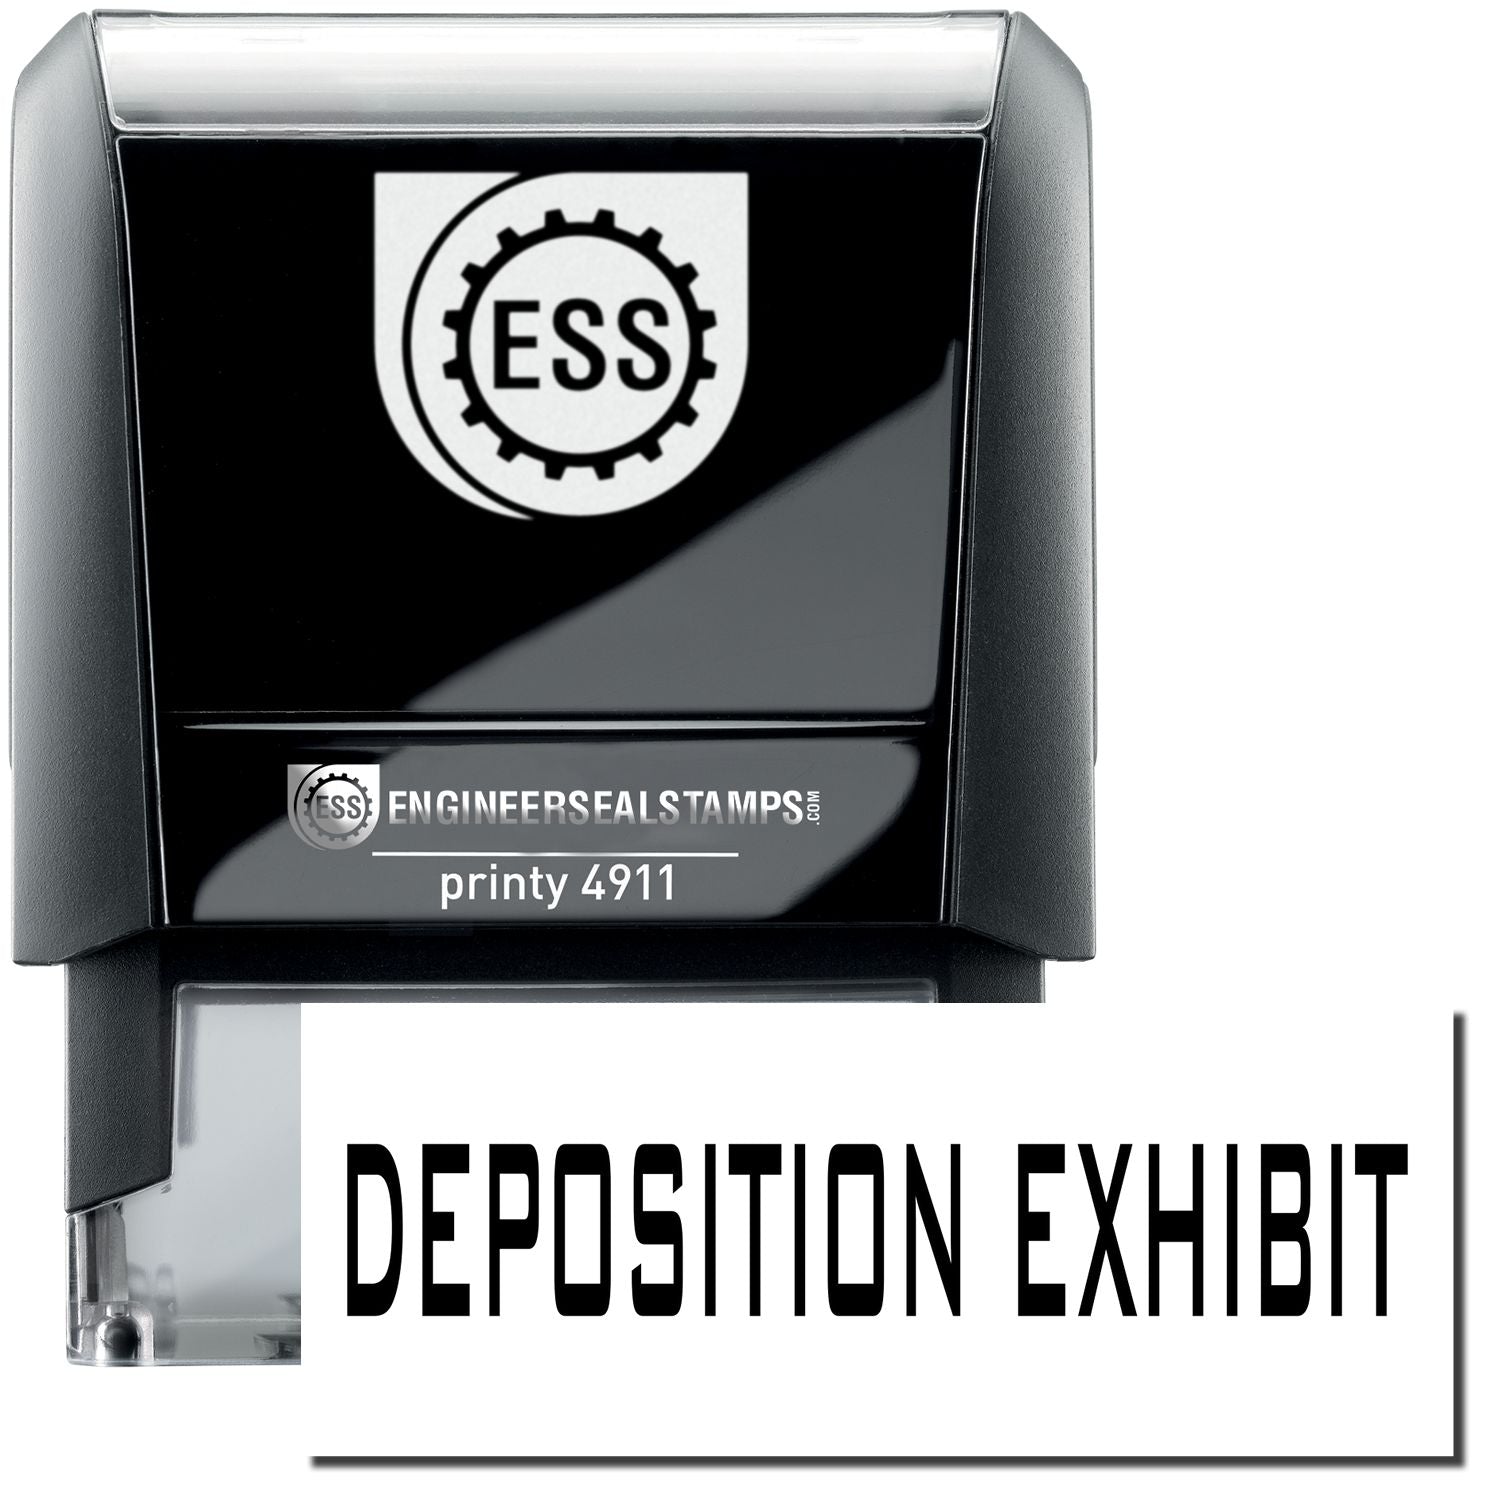 A self-inking stamp with a stamped image showing how the text "DEPOSITION EXHIBIT" is displayed after stamping.